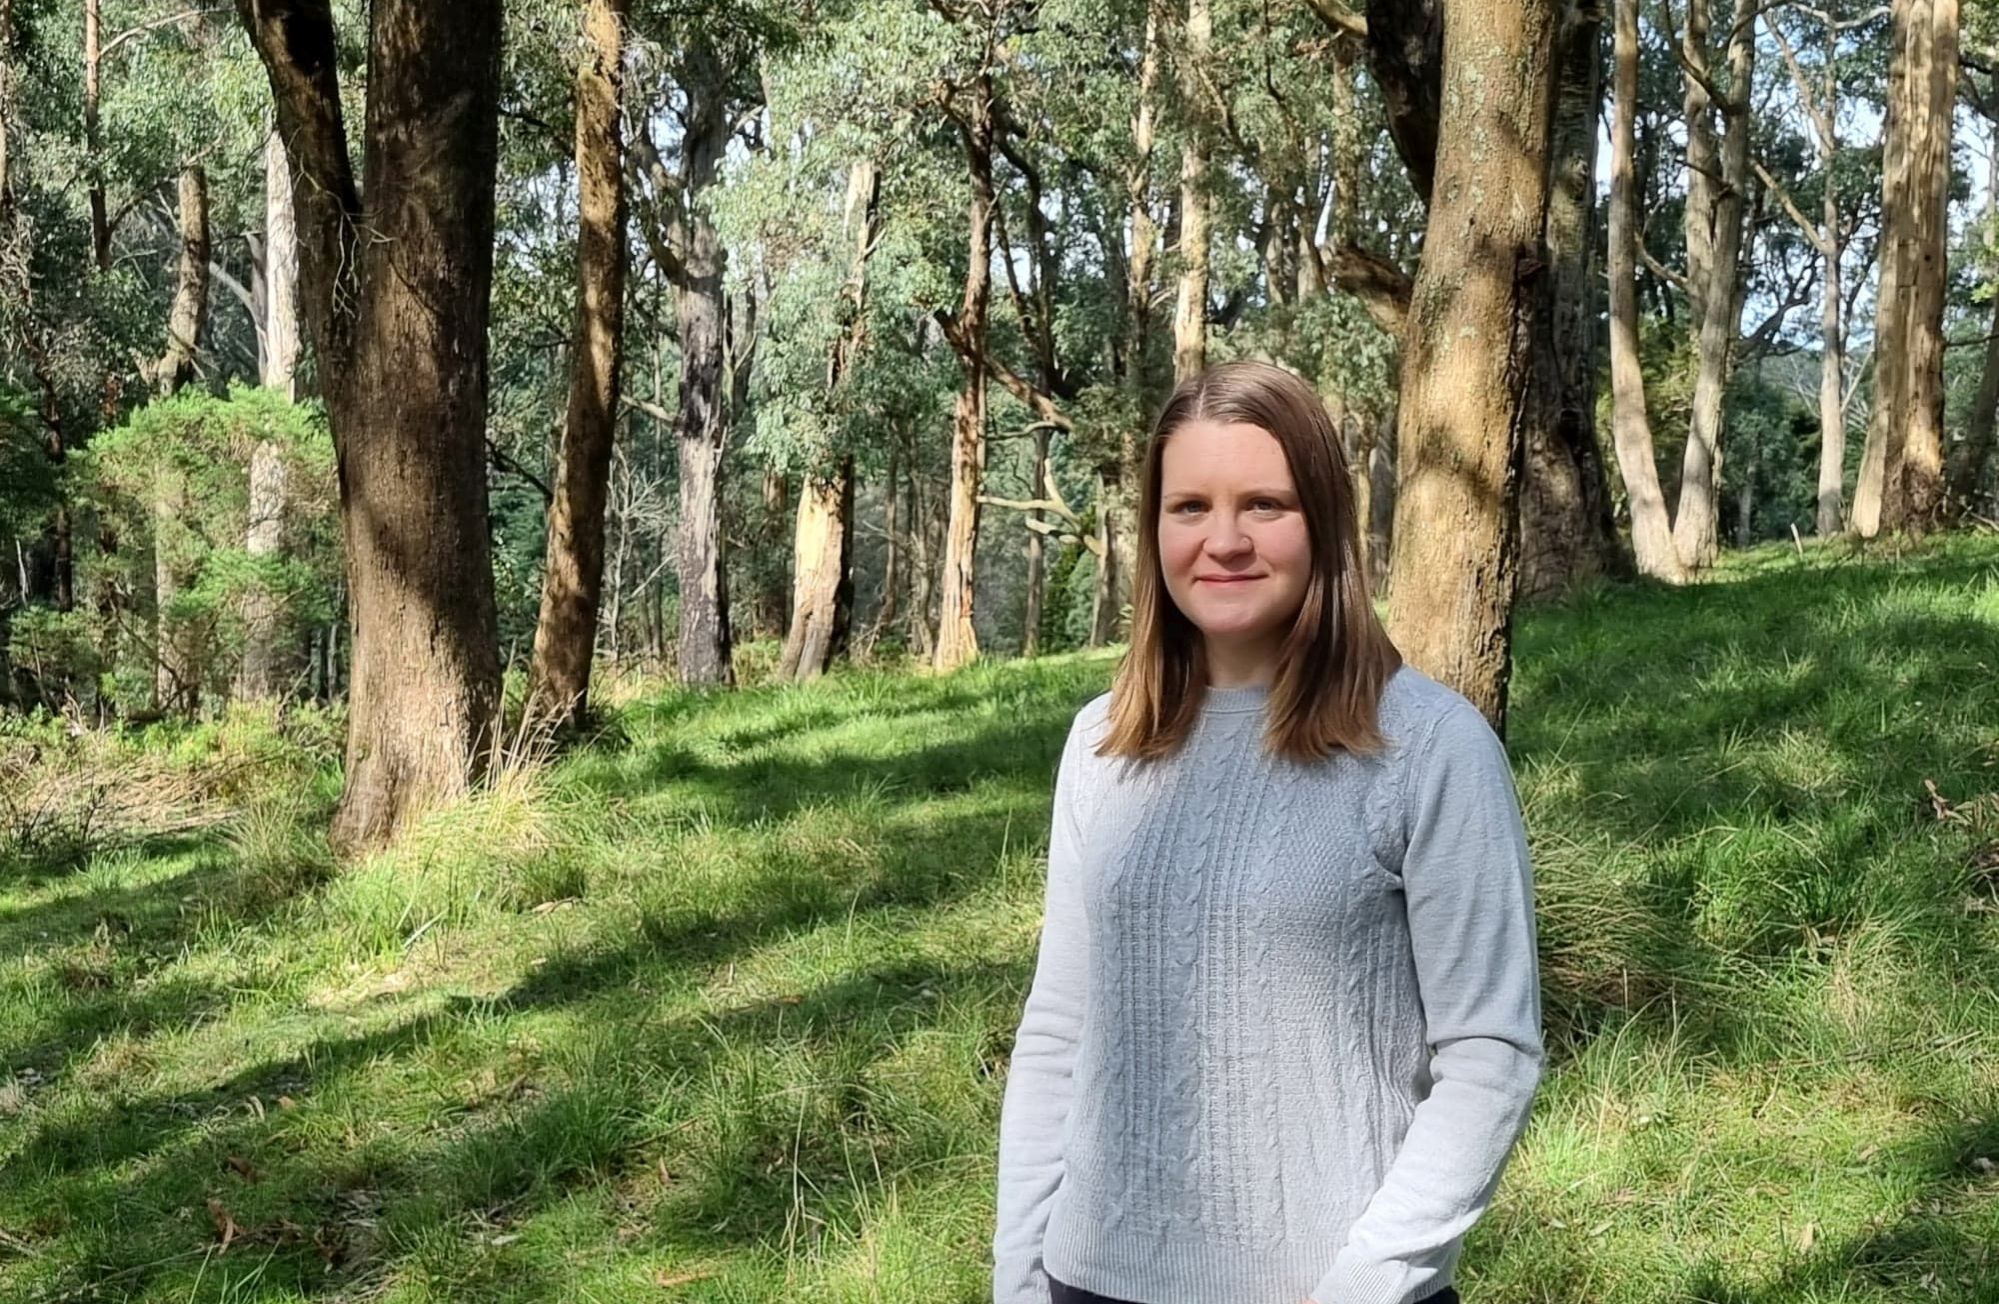 Dr Kerryn McTaggart standing in a forest.